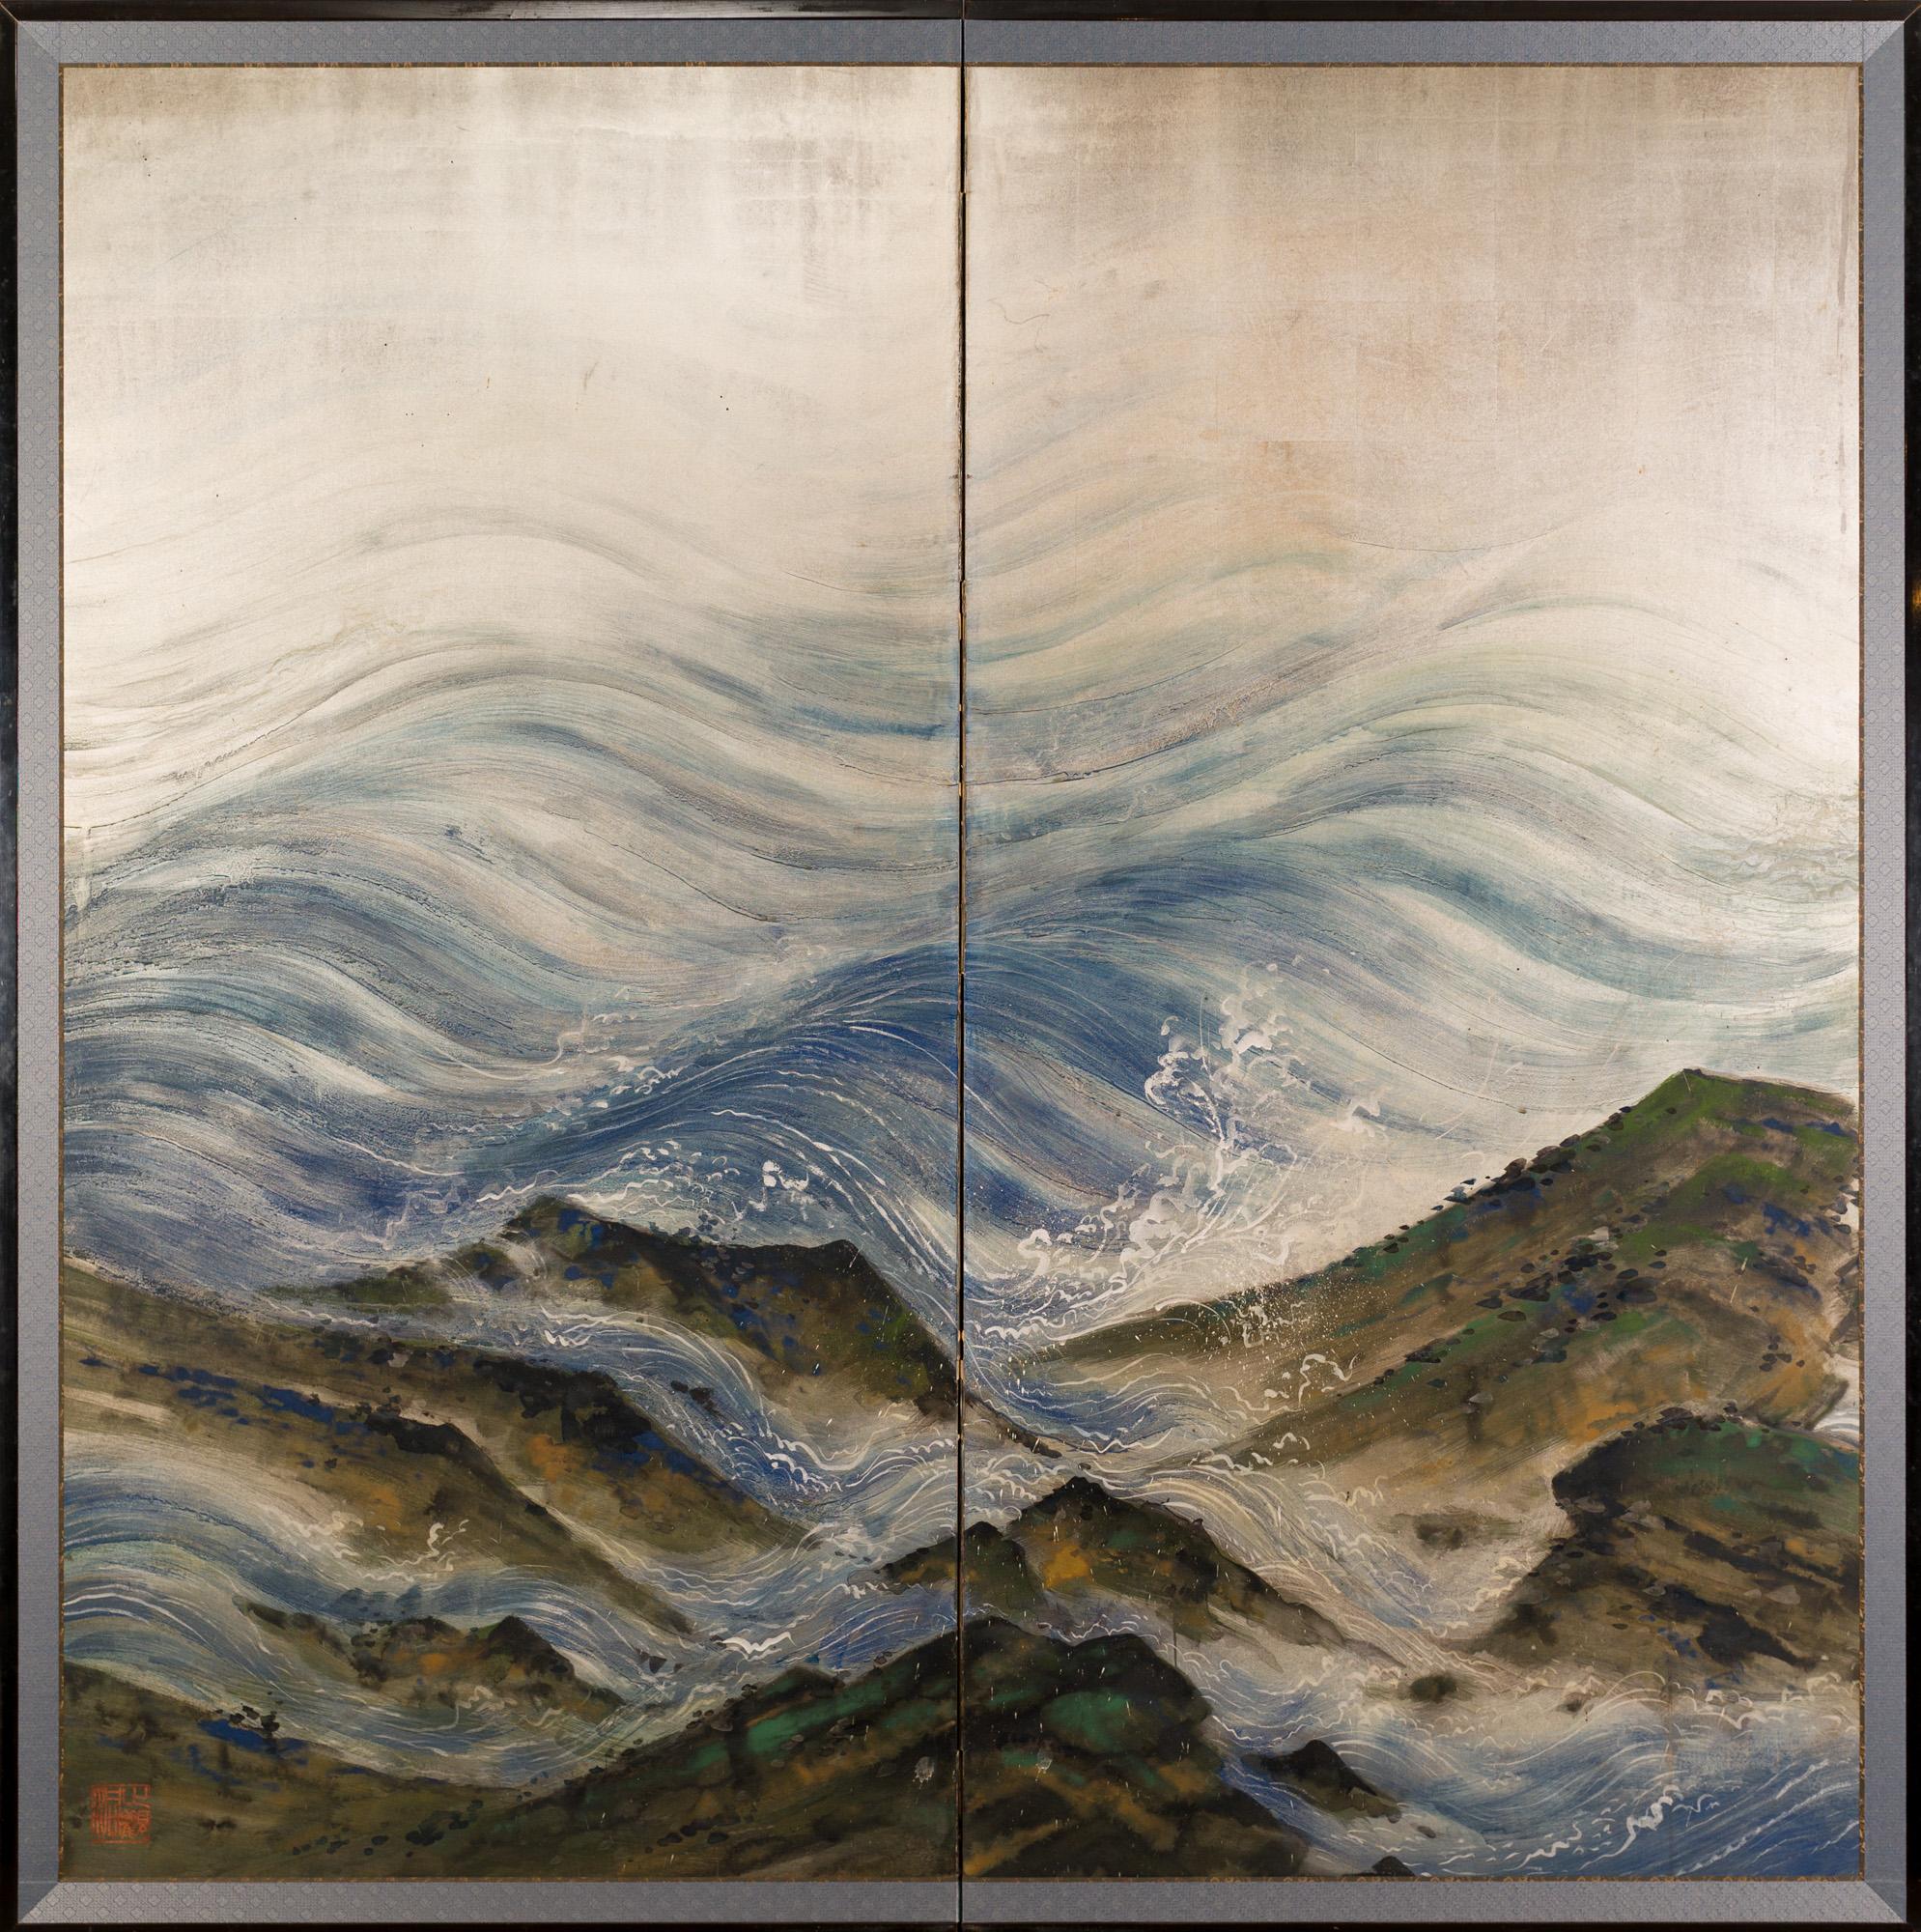 Japanese two panel screen: Rocky coastal landscape on silver, Meiji period (1868-1912) dramatic painting of ocean waves crashing on a rocky shoreline. Beautifully painted sea spray and textured rocks in mineral pigments on silver leaf. Pair